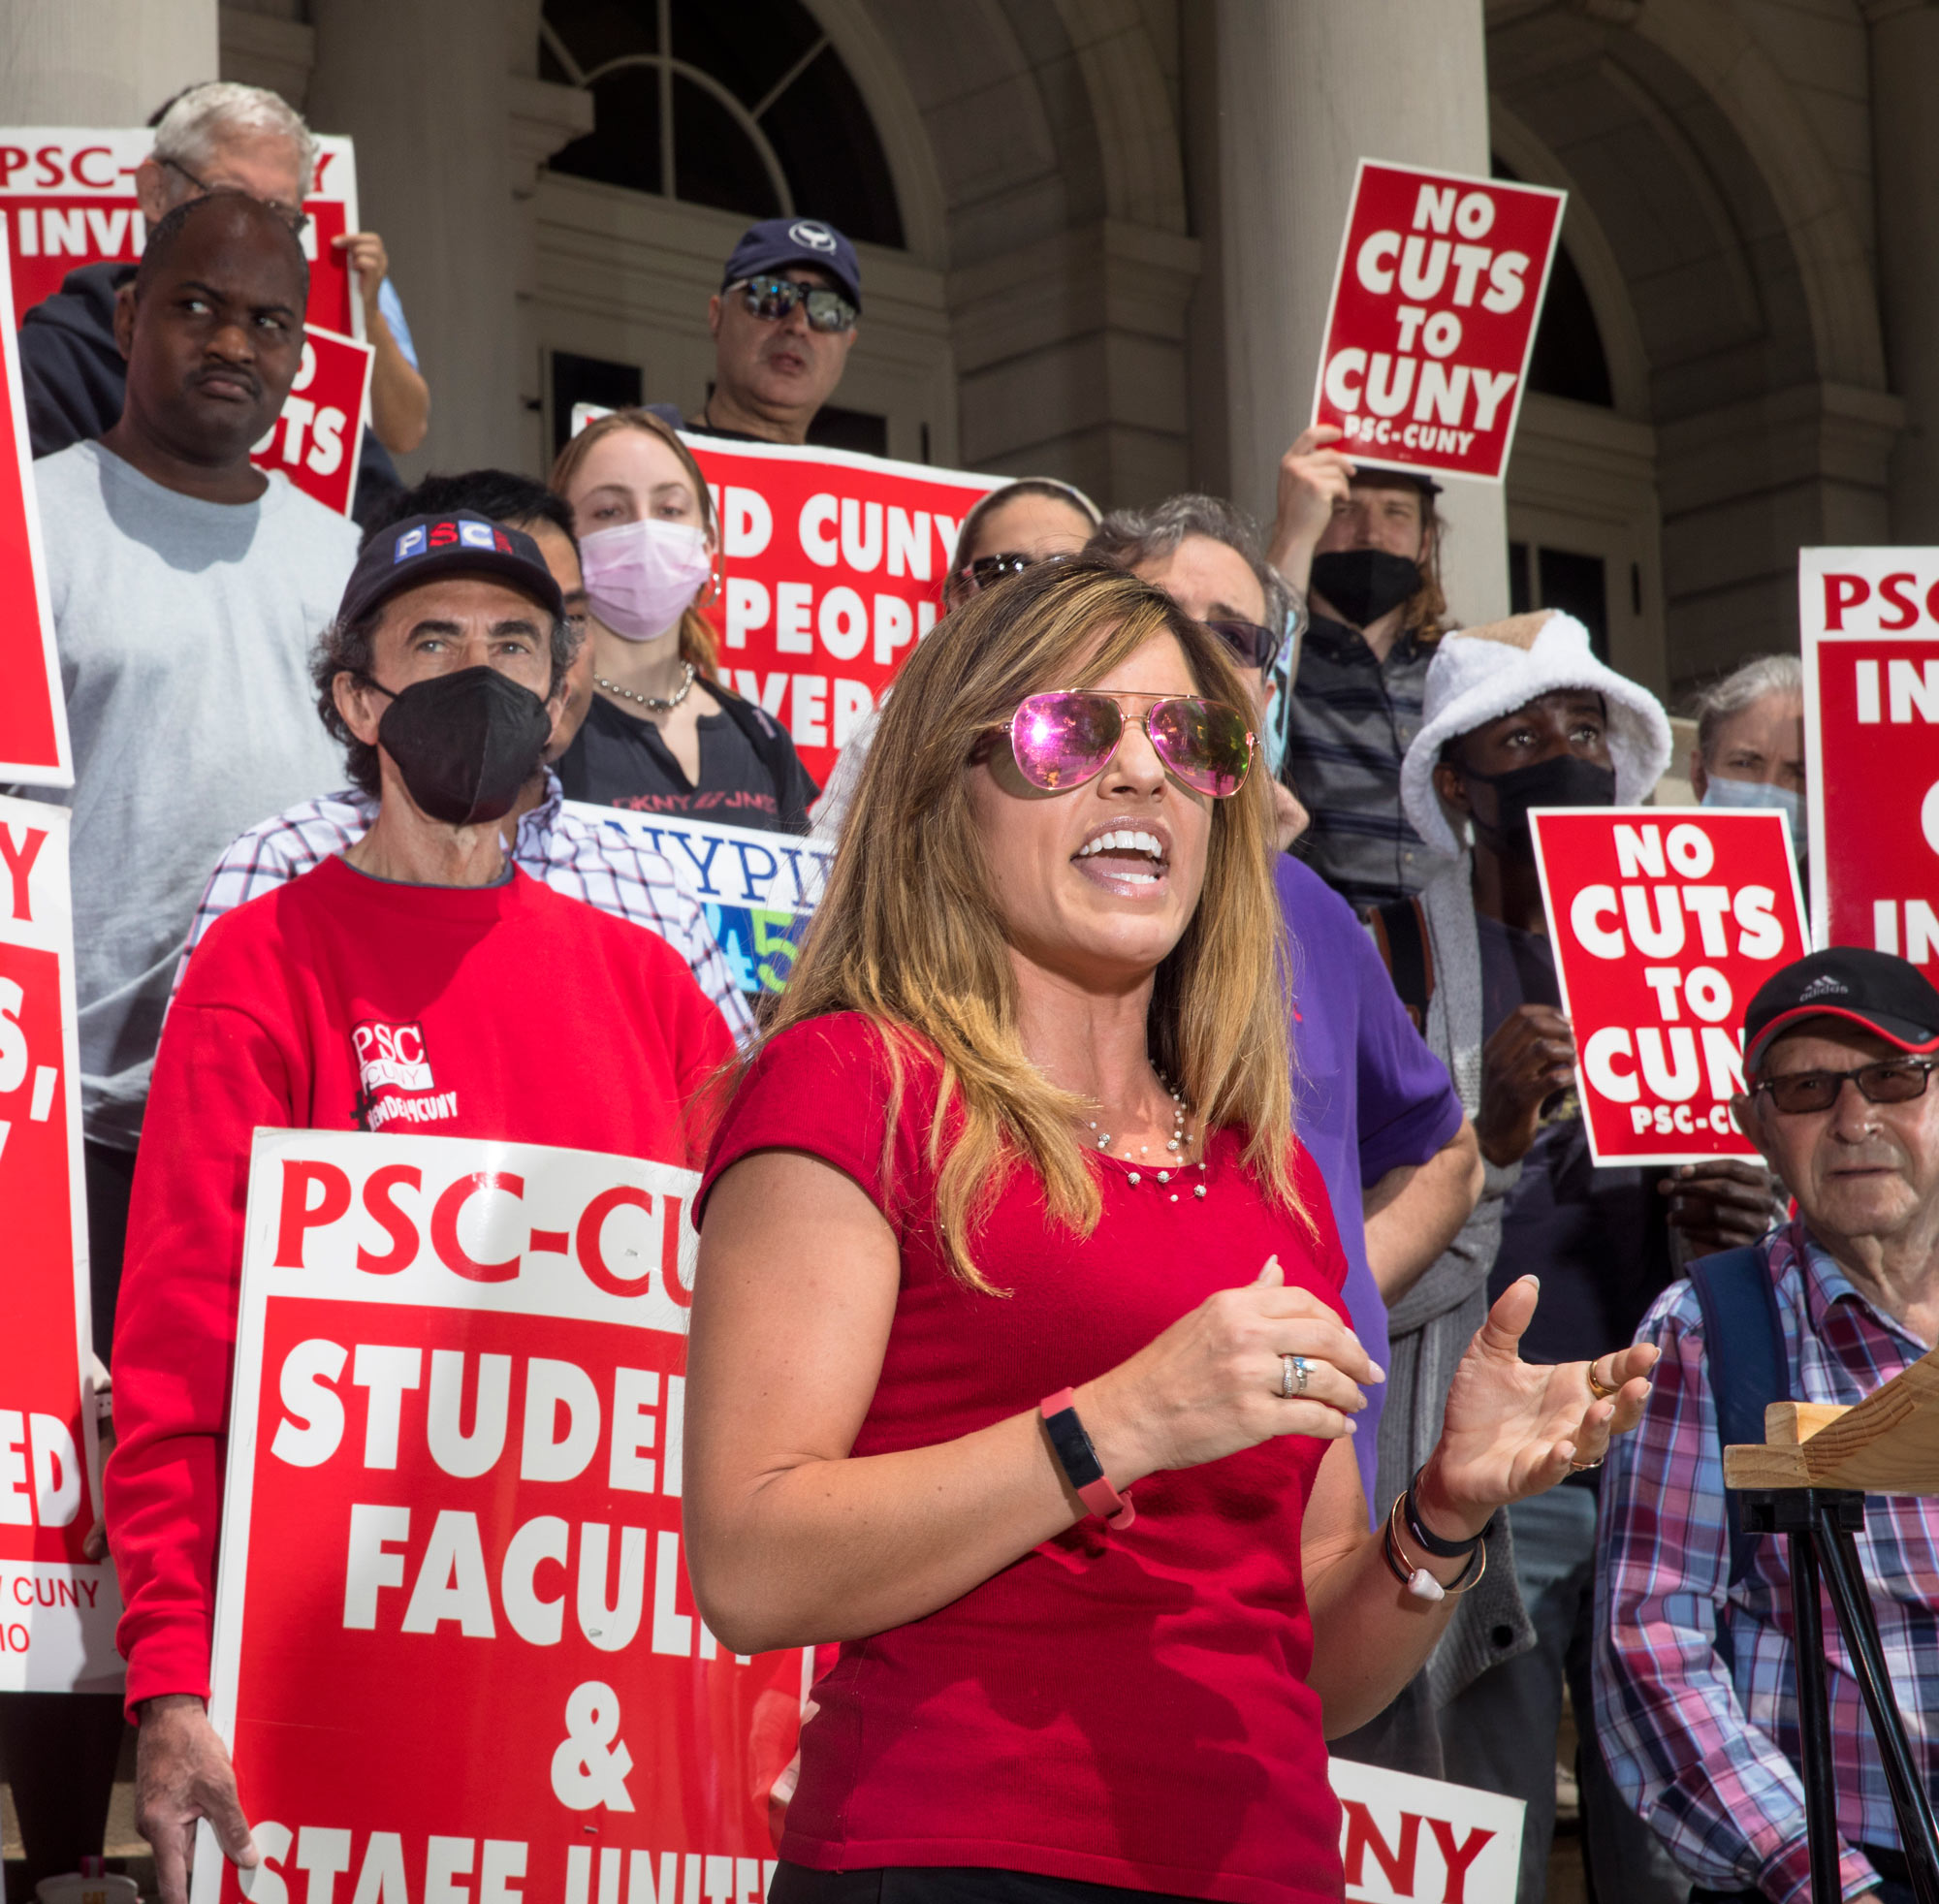 In June, the PSC protests the Adams administration's plan to reduce city funding for community colleges. (Credit: Dave Sanders)